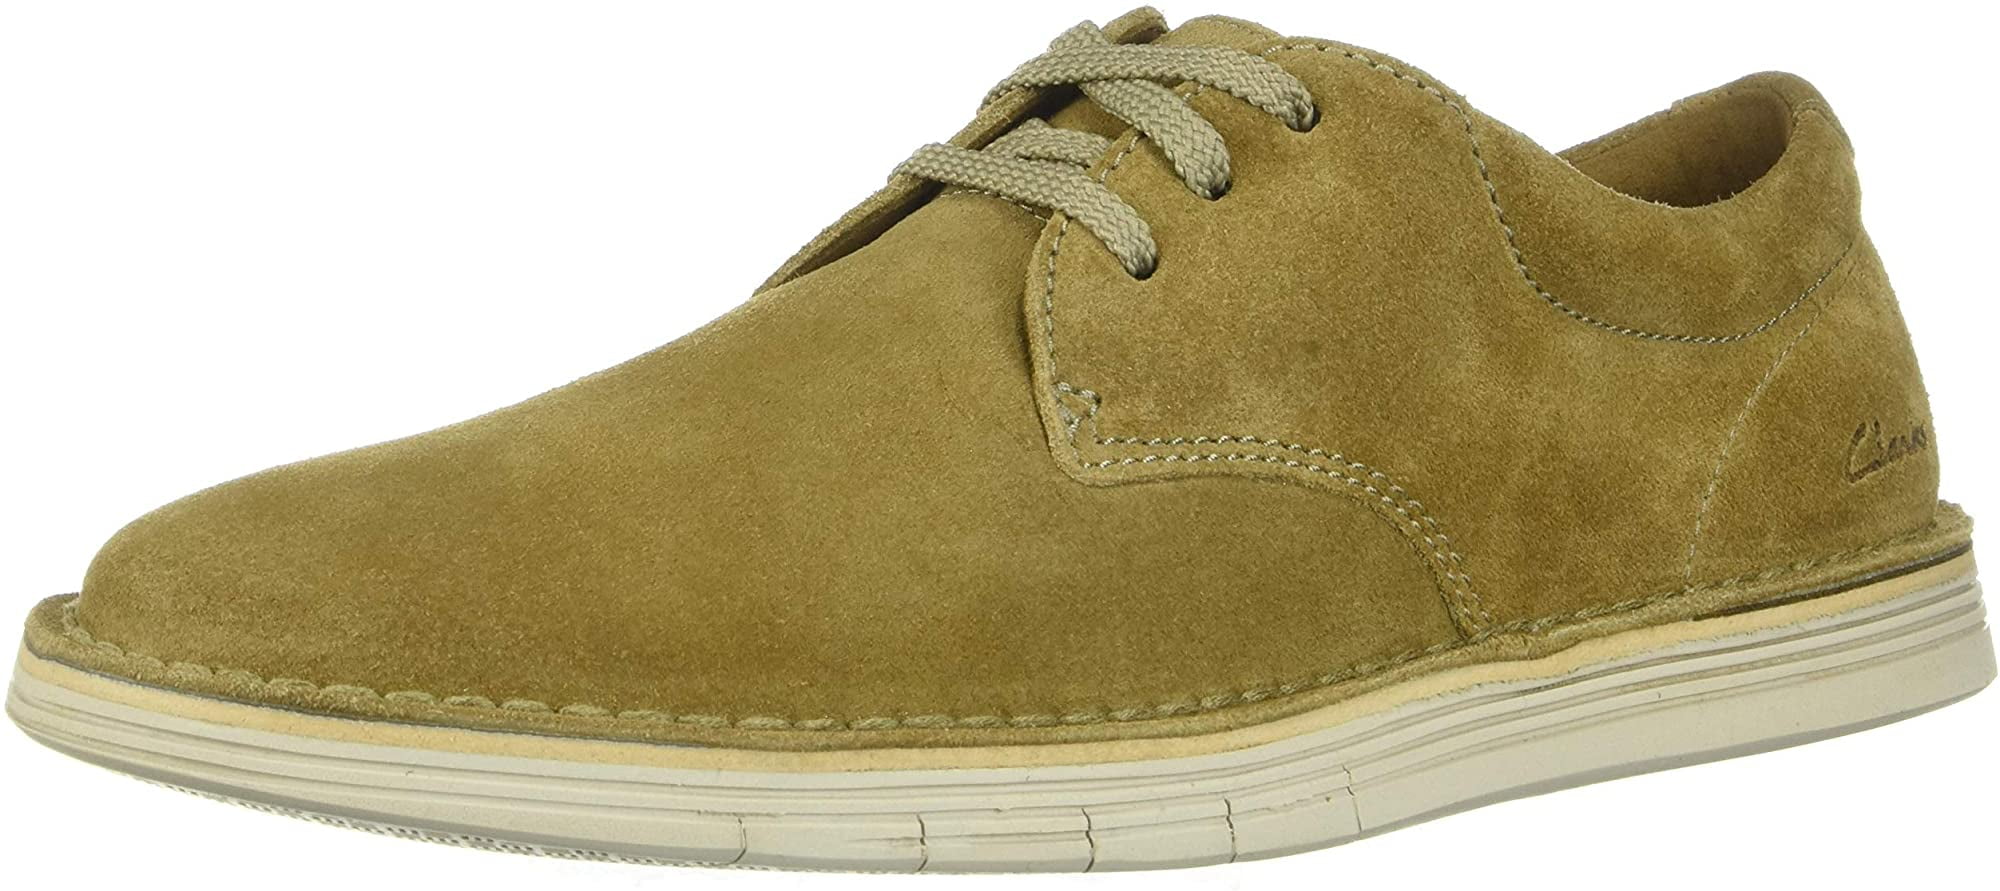 Clarks Mens Forge Vibe Oxford | Walmart Canada